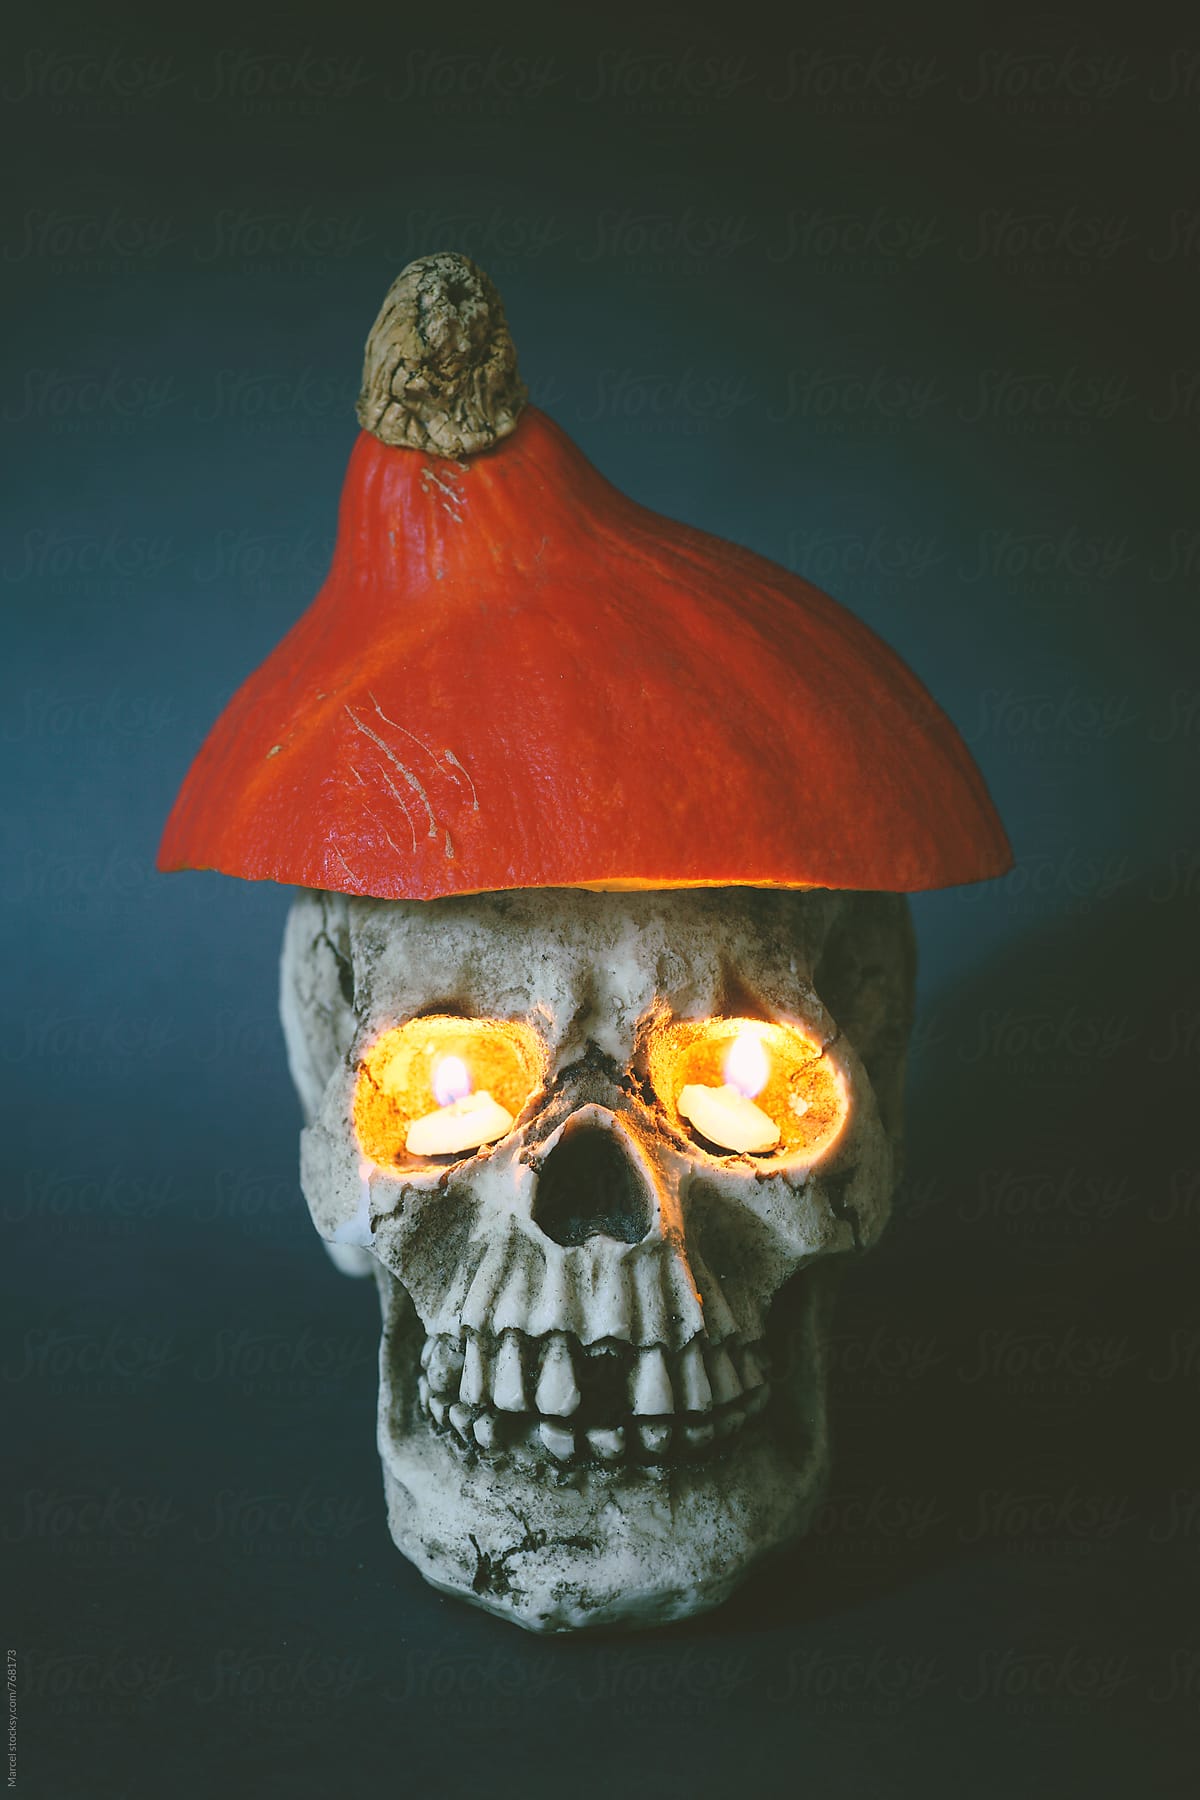 Skull with pumpkin hat and burning eyes